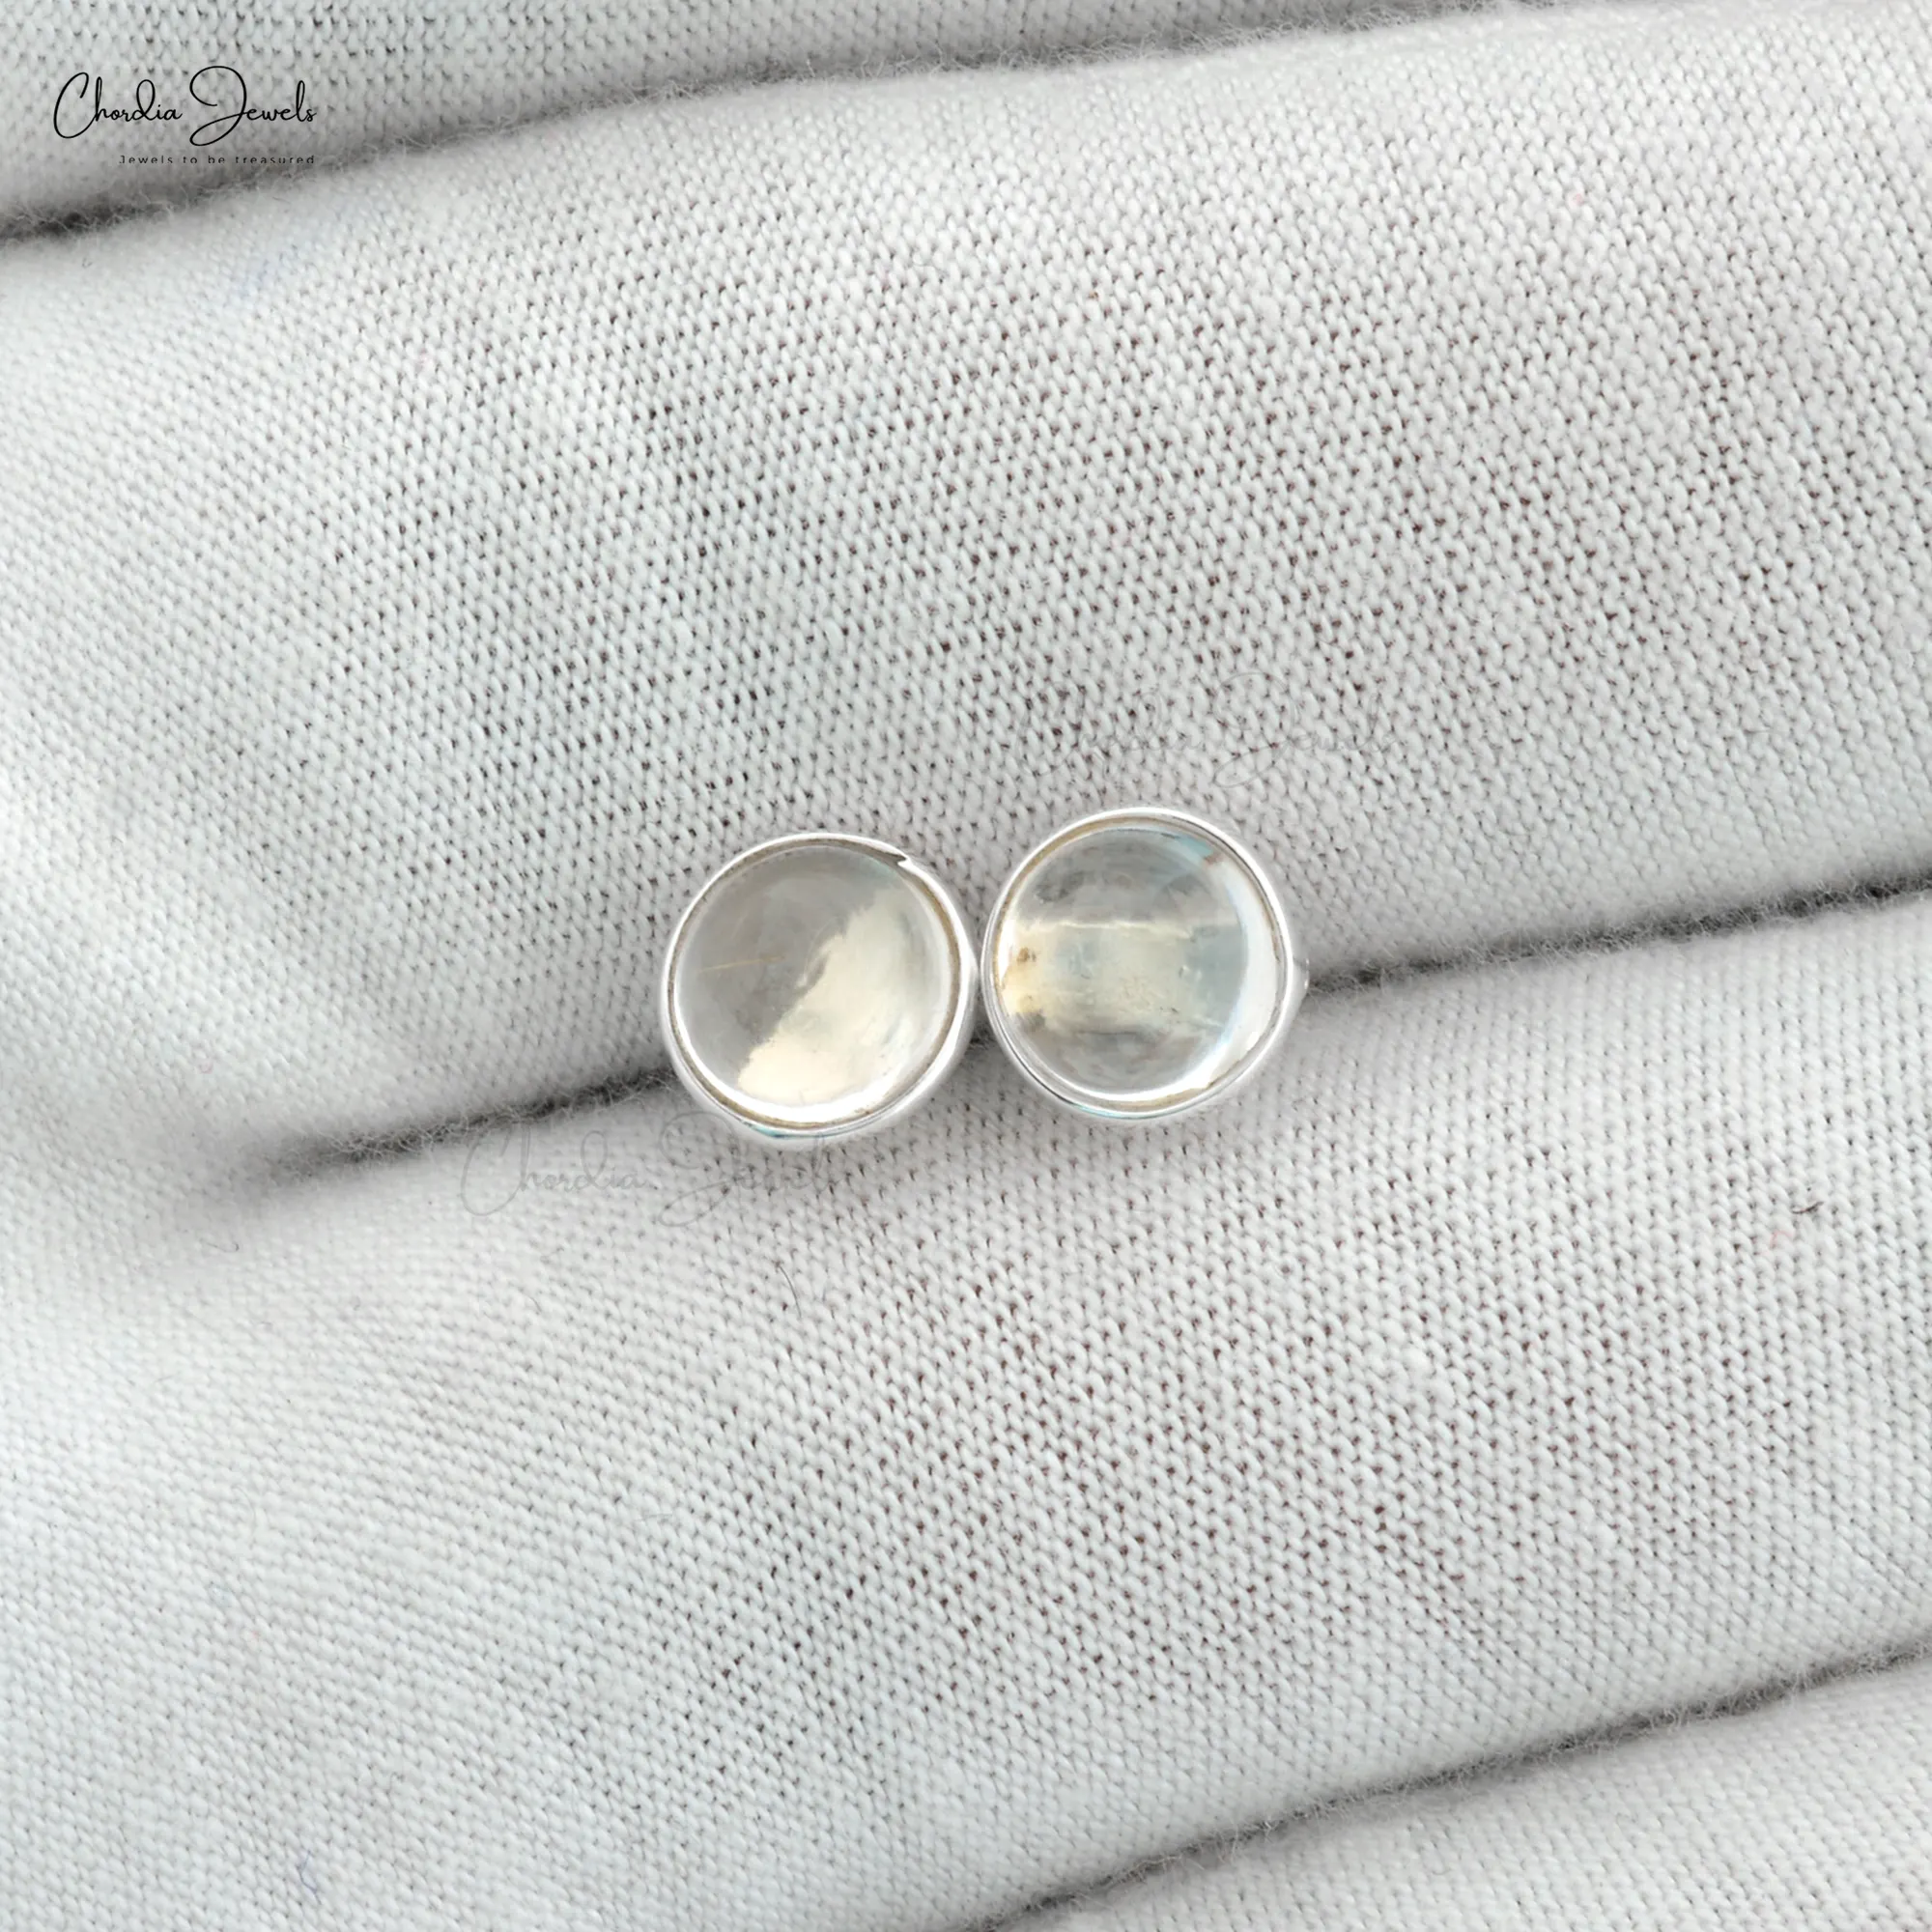 Top Quality Natural White Topaz Round Cabochon Birthstone Earrings Push Back Closure Bezel Set Earrings Fashion Jewelry